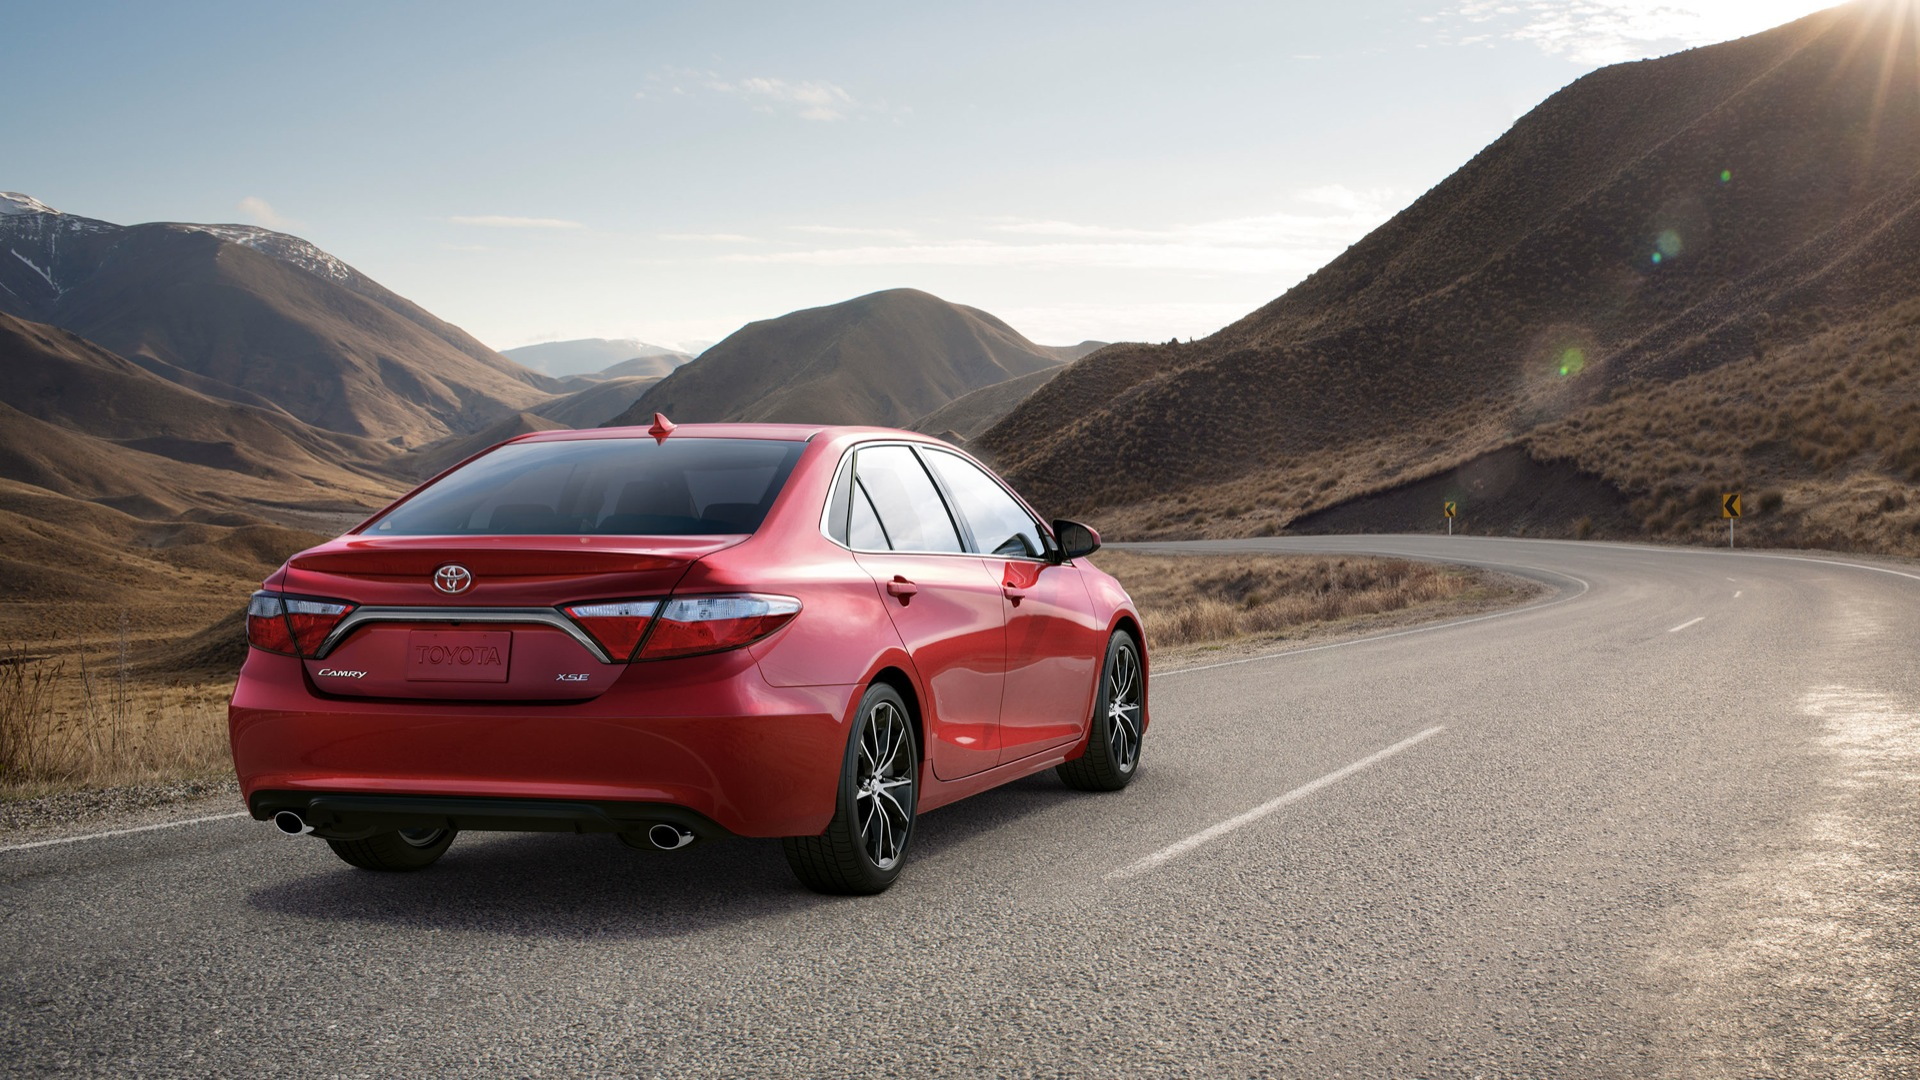 2015 Toyota Camry Hybrid Priced, MPG Remains The Same